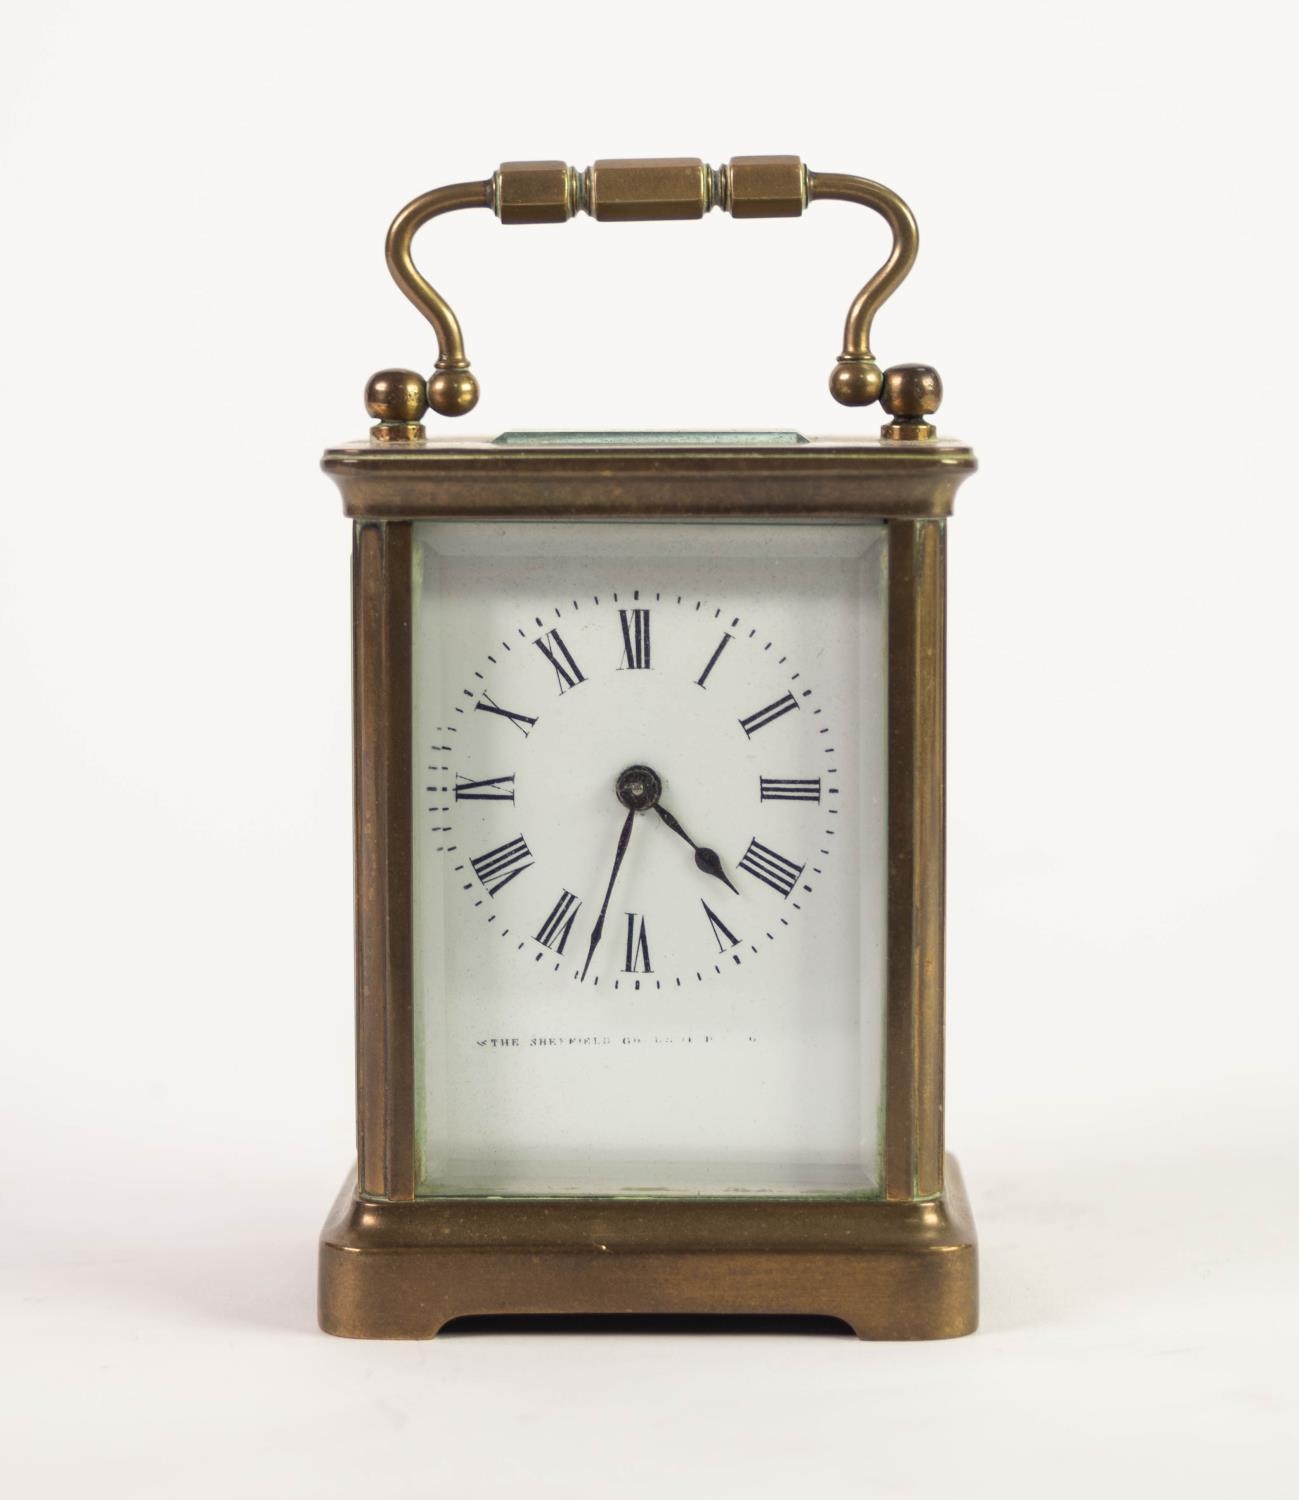 EARLY 20th CENTURY BRASS TIME PIECE CARRIAGE CLOCK with black and white roman dial, folding - Image 4 of 6